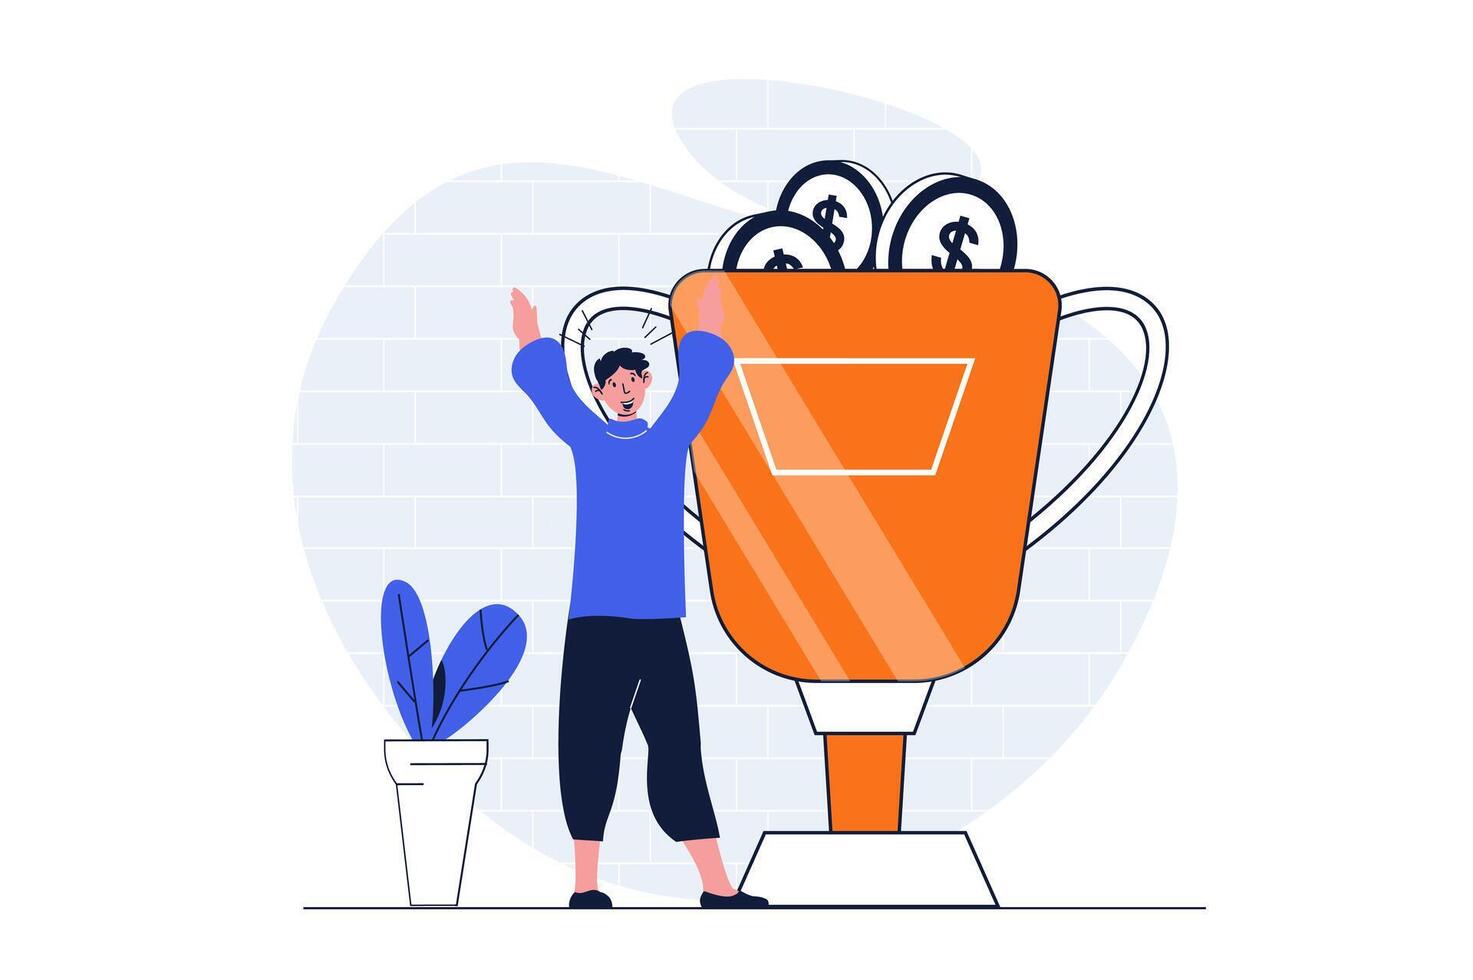 Business success web concept with character scene. Man celebrating victory and getting golden cup and profit. People situation in flat design. Vector illustration for social media marketing material.